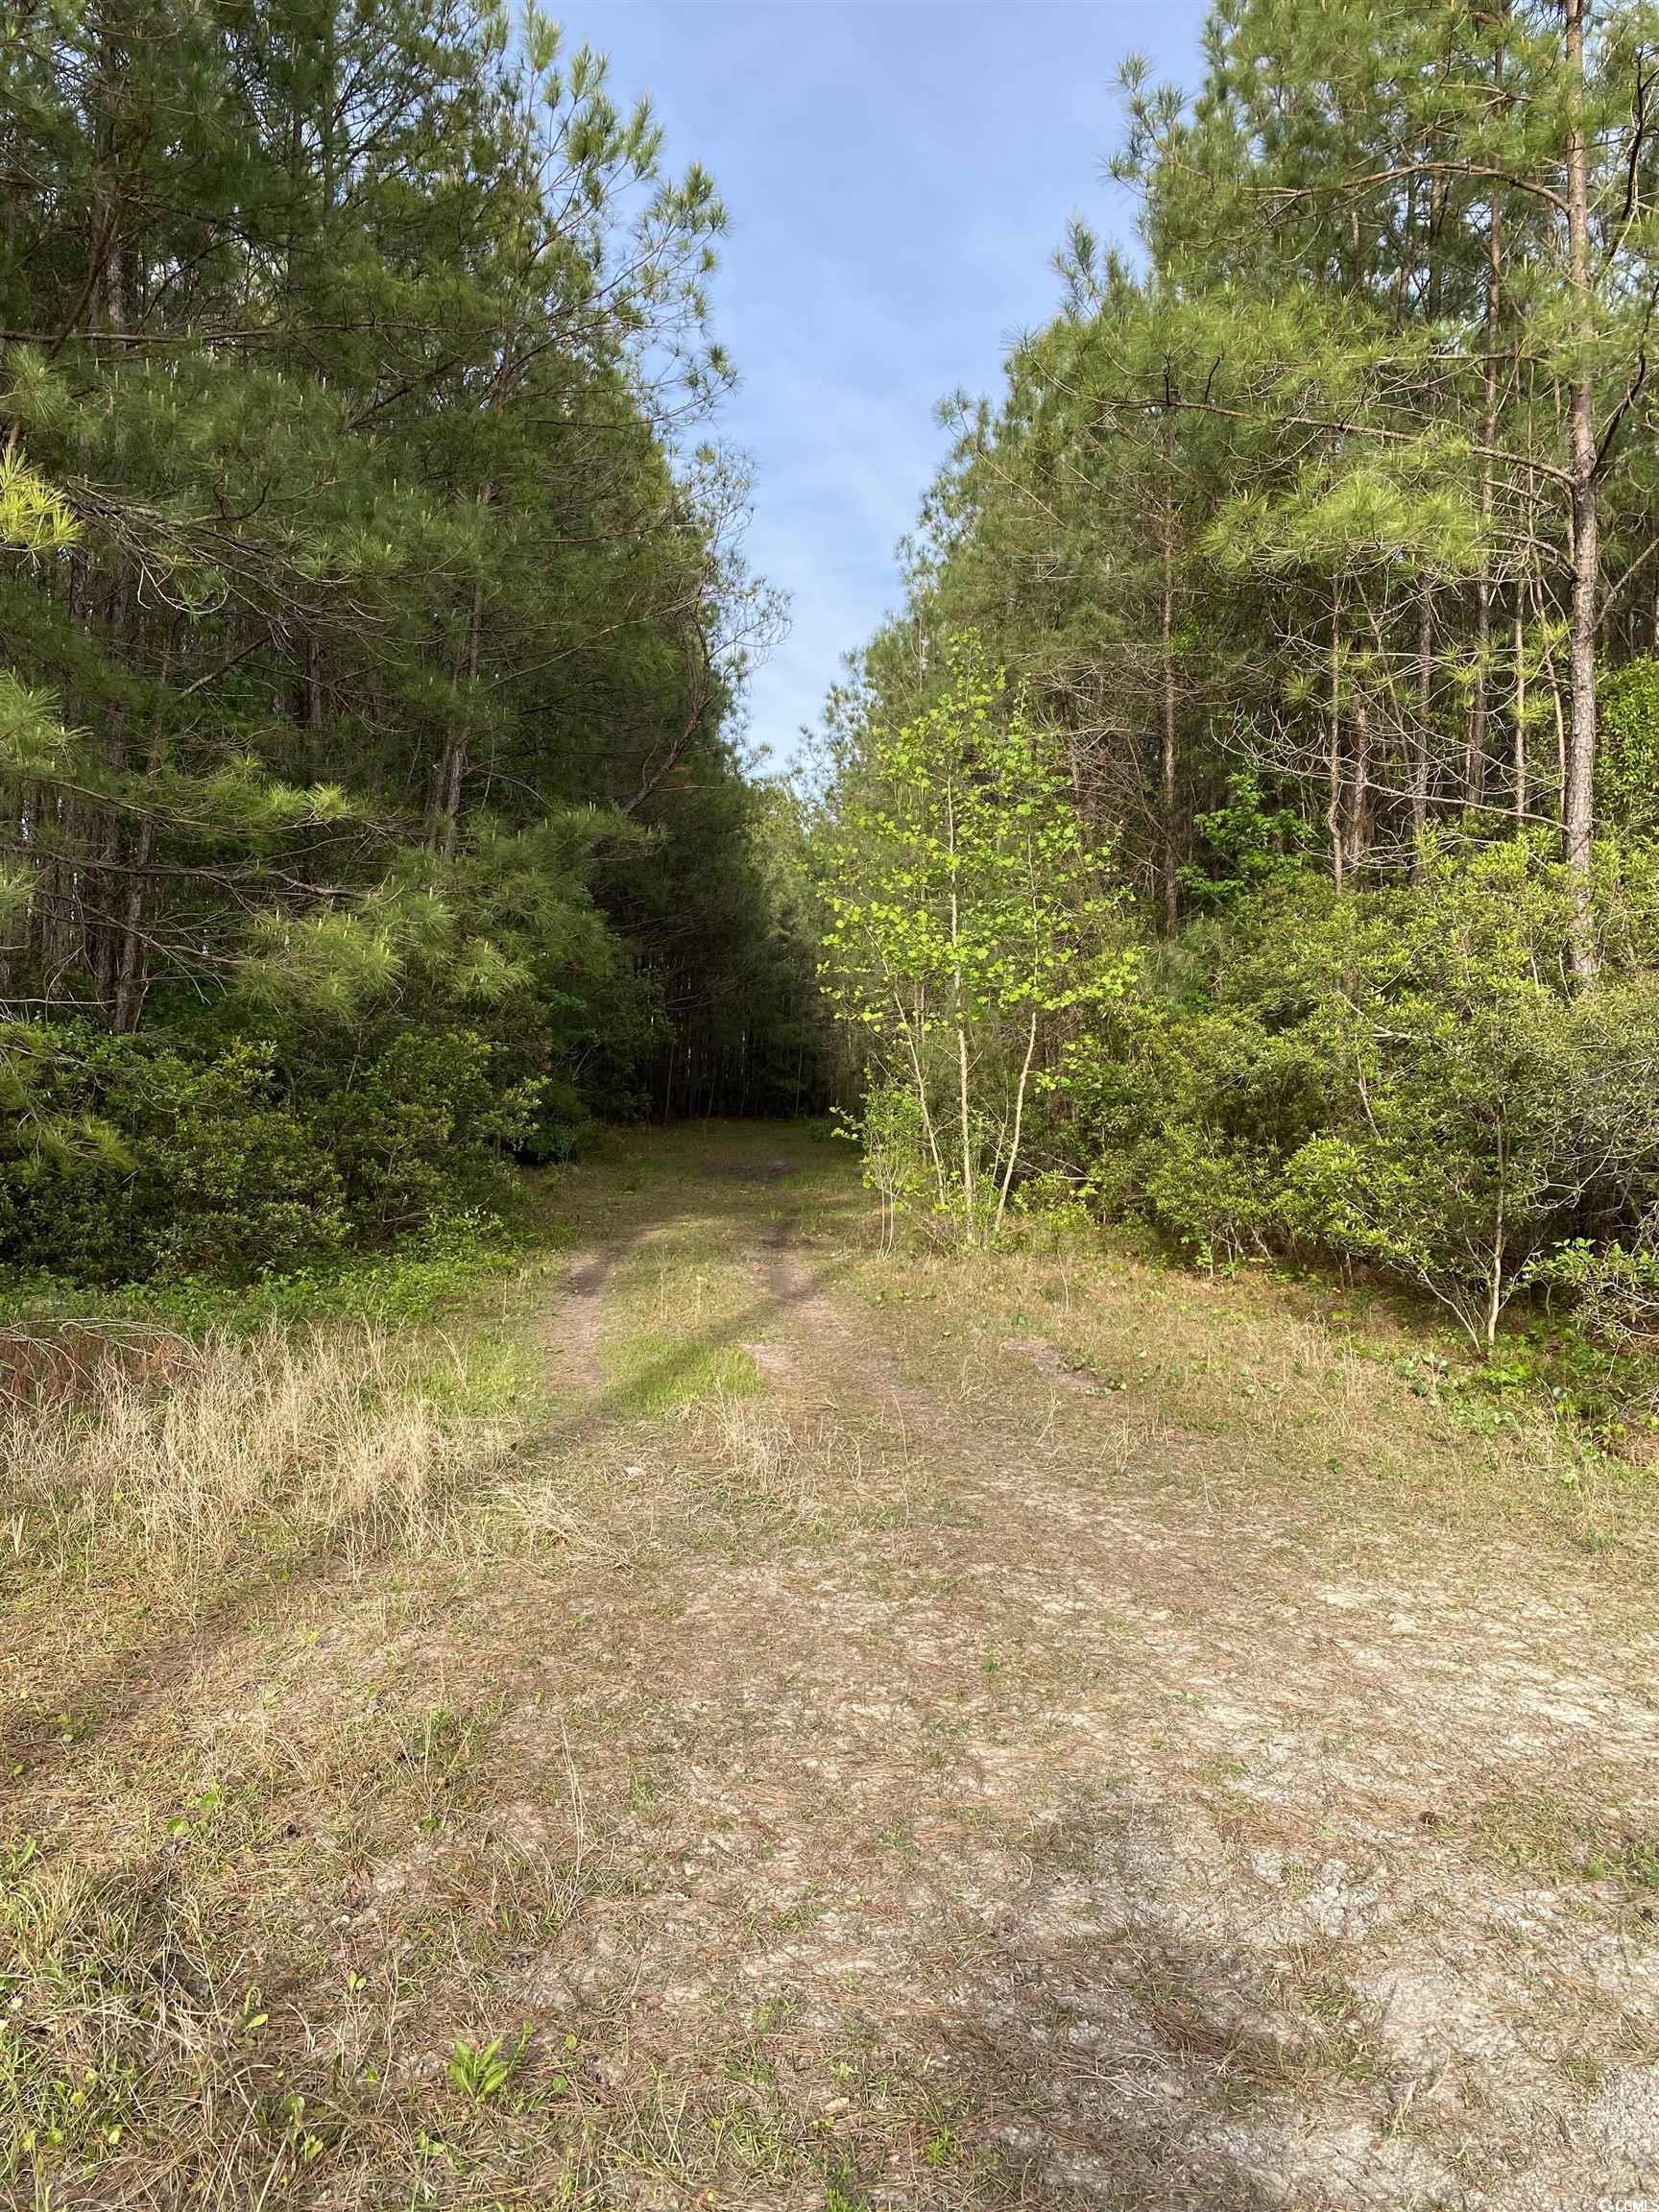 country living at its best and close to the beautiful town of conway. wonderful potential for home/farm on 9.61 acres with easy access to all that this location has to offer. zoned cfa so it has a multitude of uses.